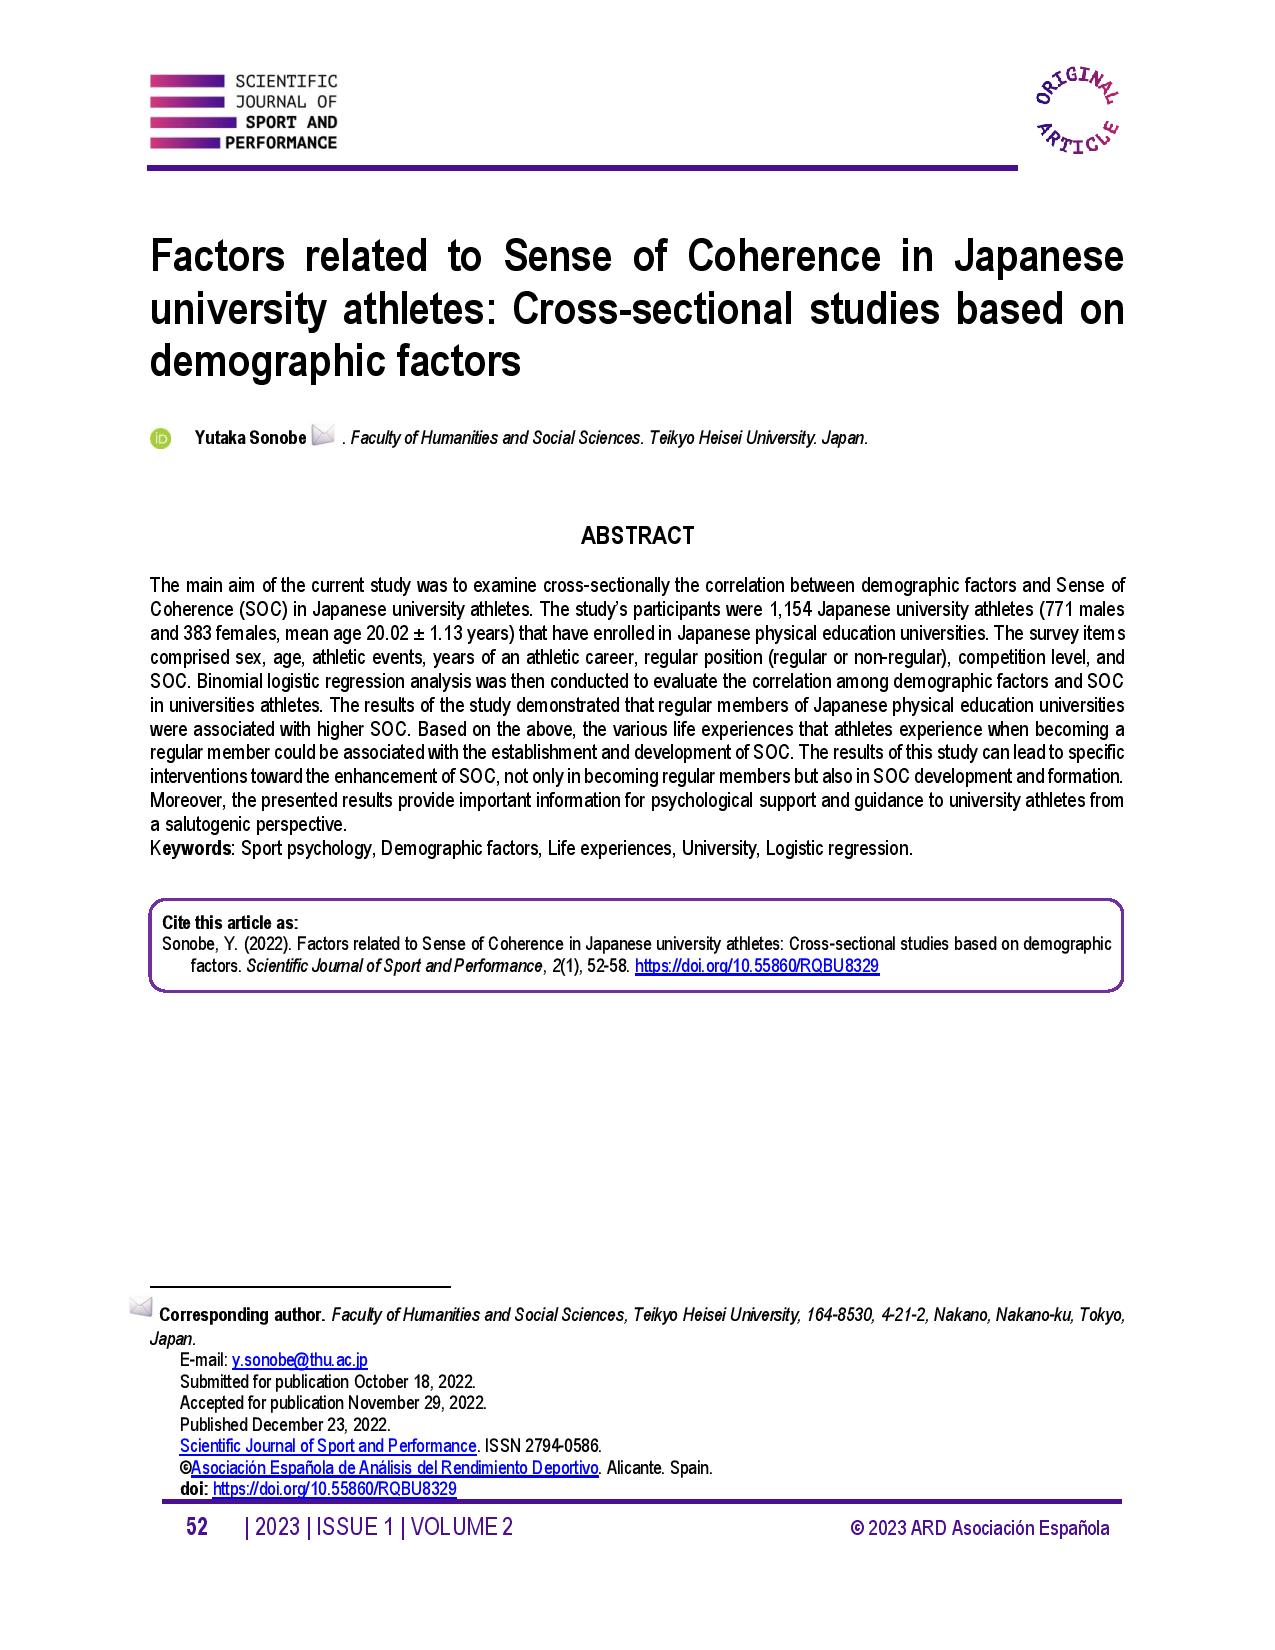 Factors related to Sense of Coherence in Japanese university athletes: Cross-sectional studies based on demographic factors